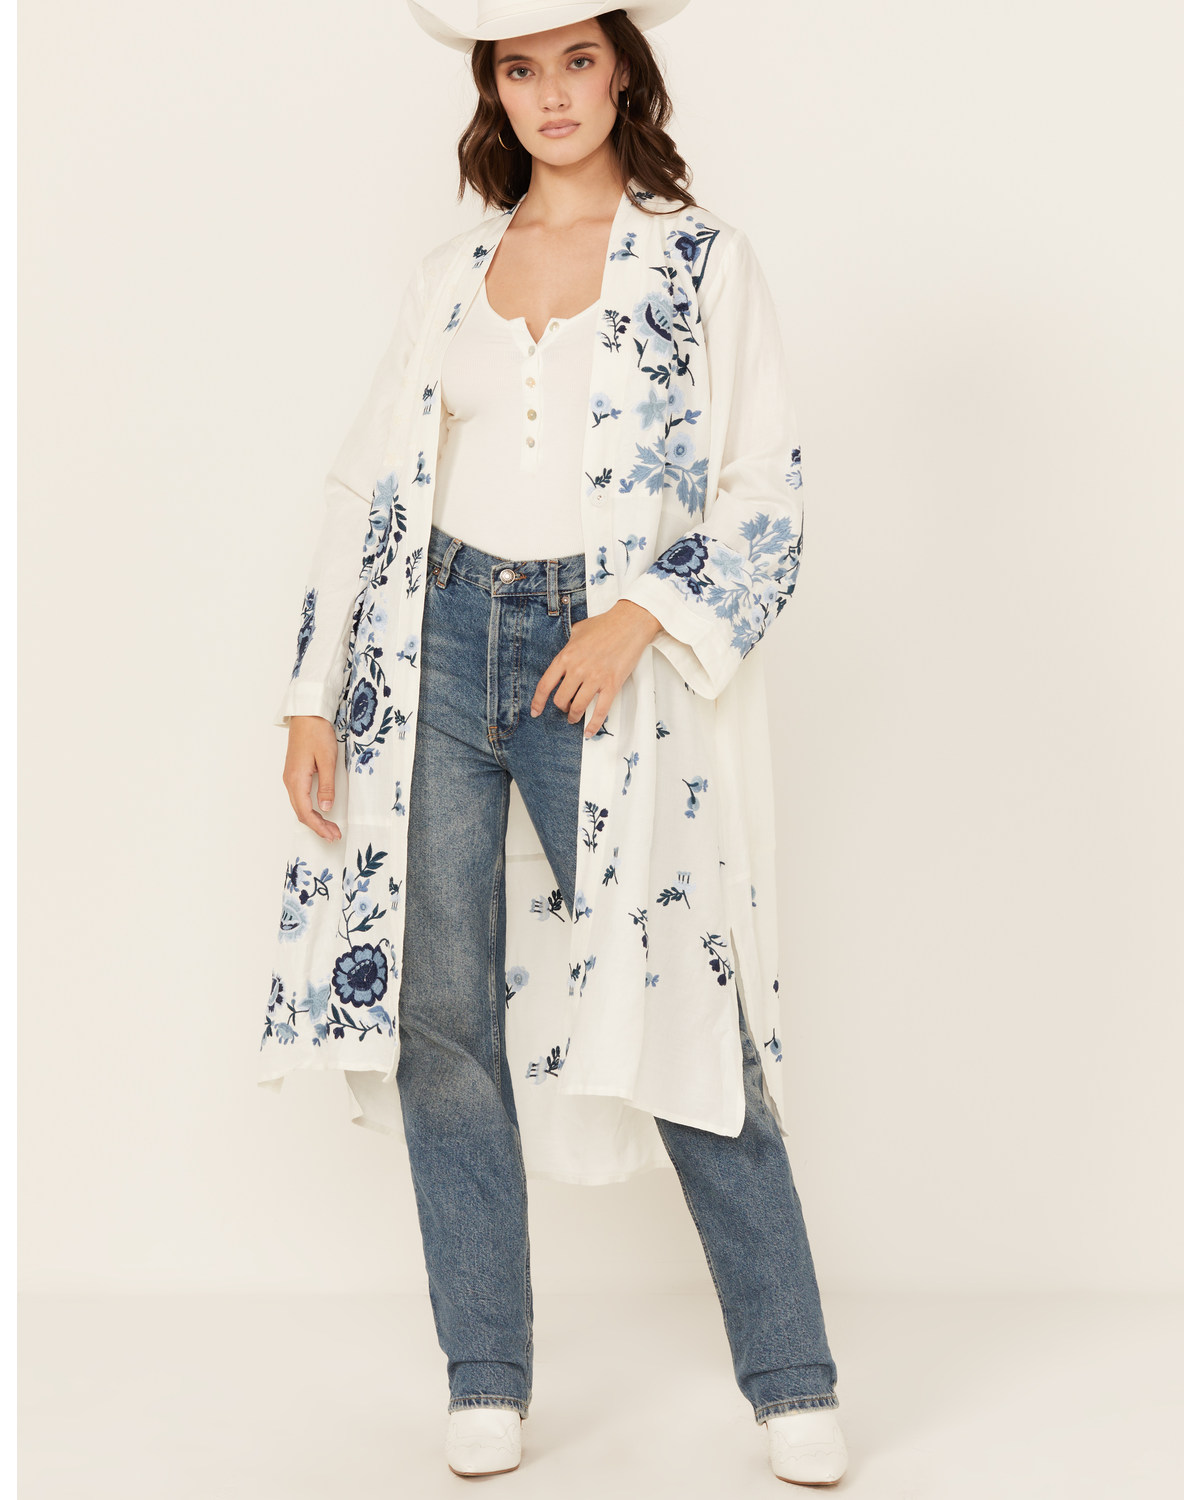 Johnny Was Women's Floral Embroidered Long Sleeve Kimono